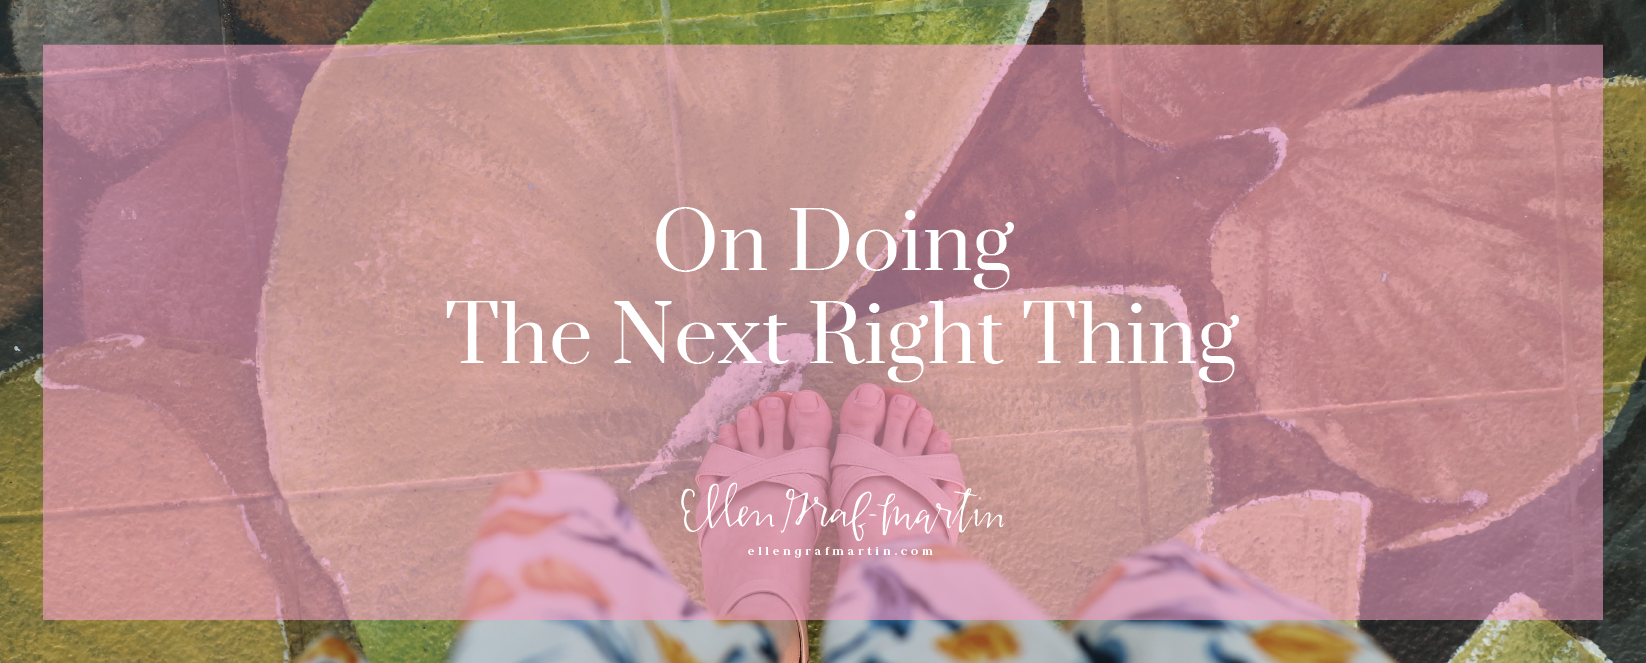 On Doing The Next Right Thing